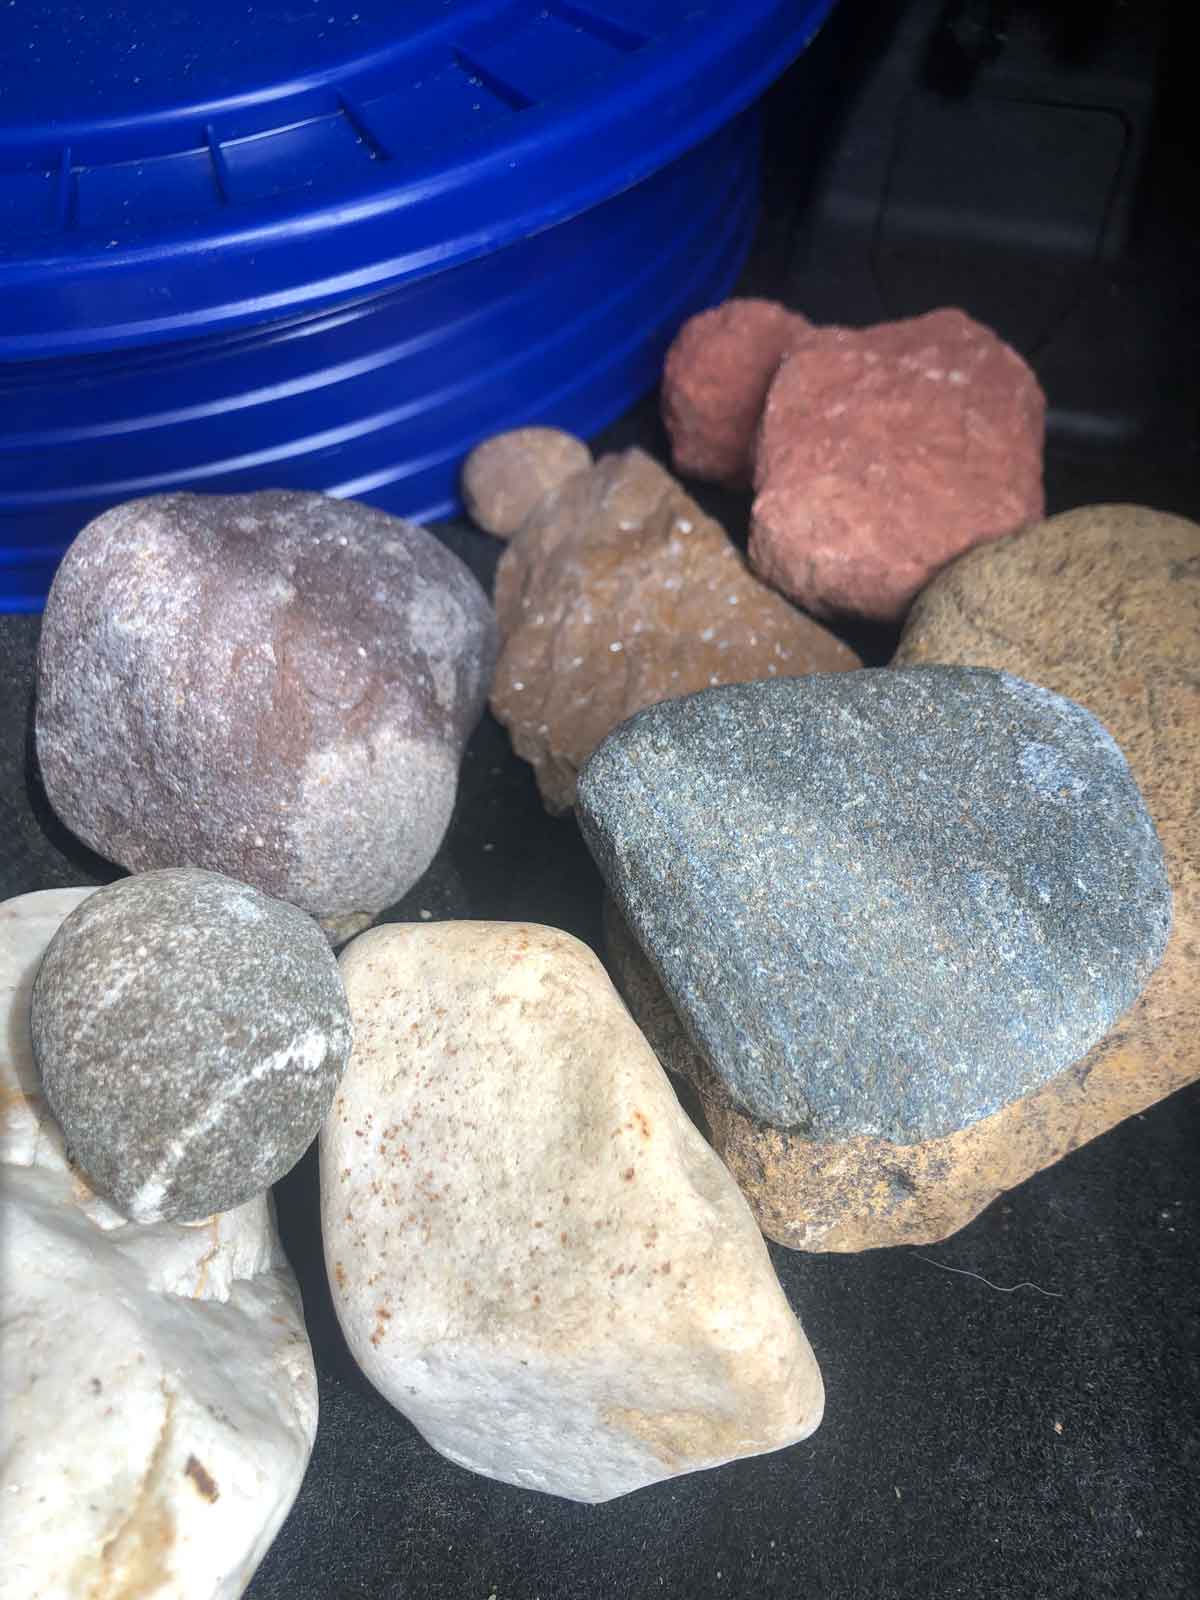 The rocks I hope to use for making paints.